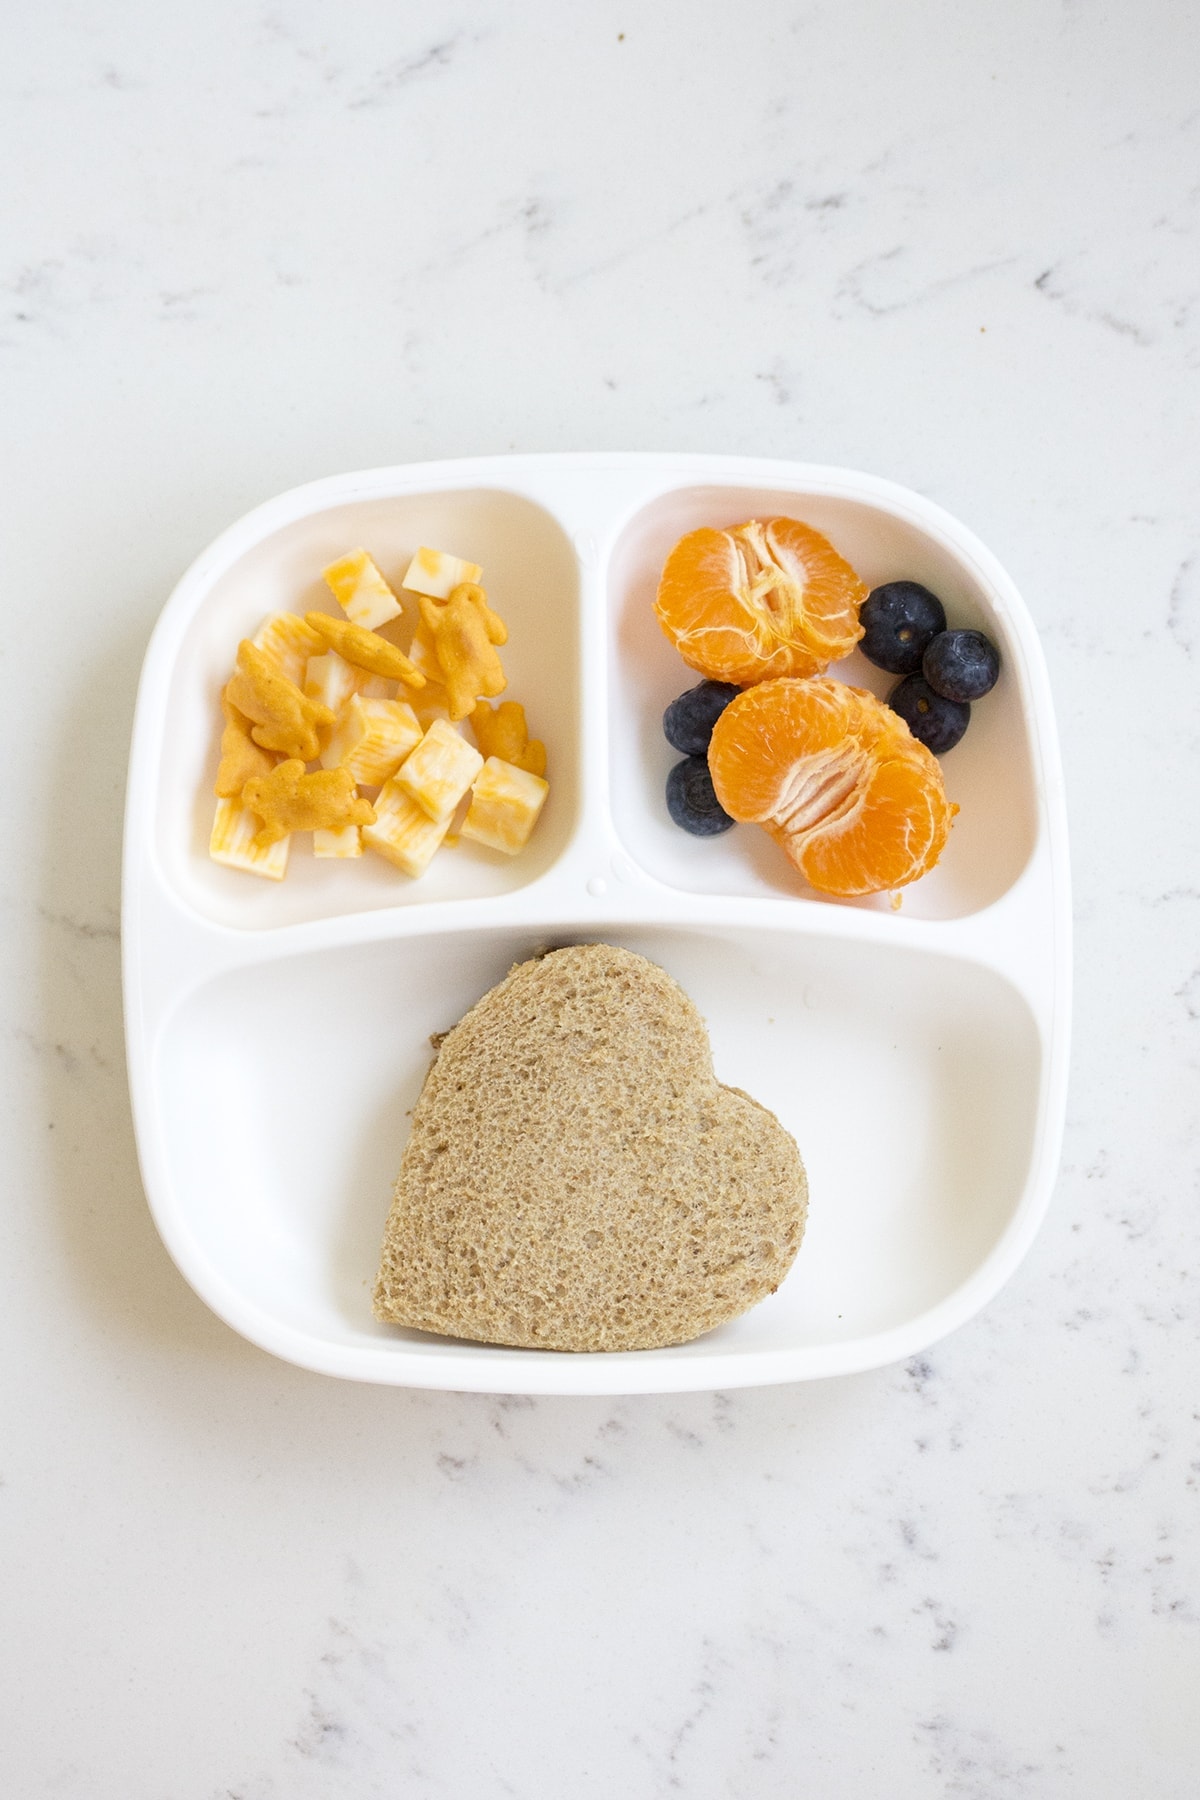 Toddler Meals: What I fed the Twins